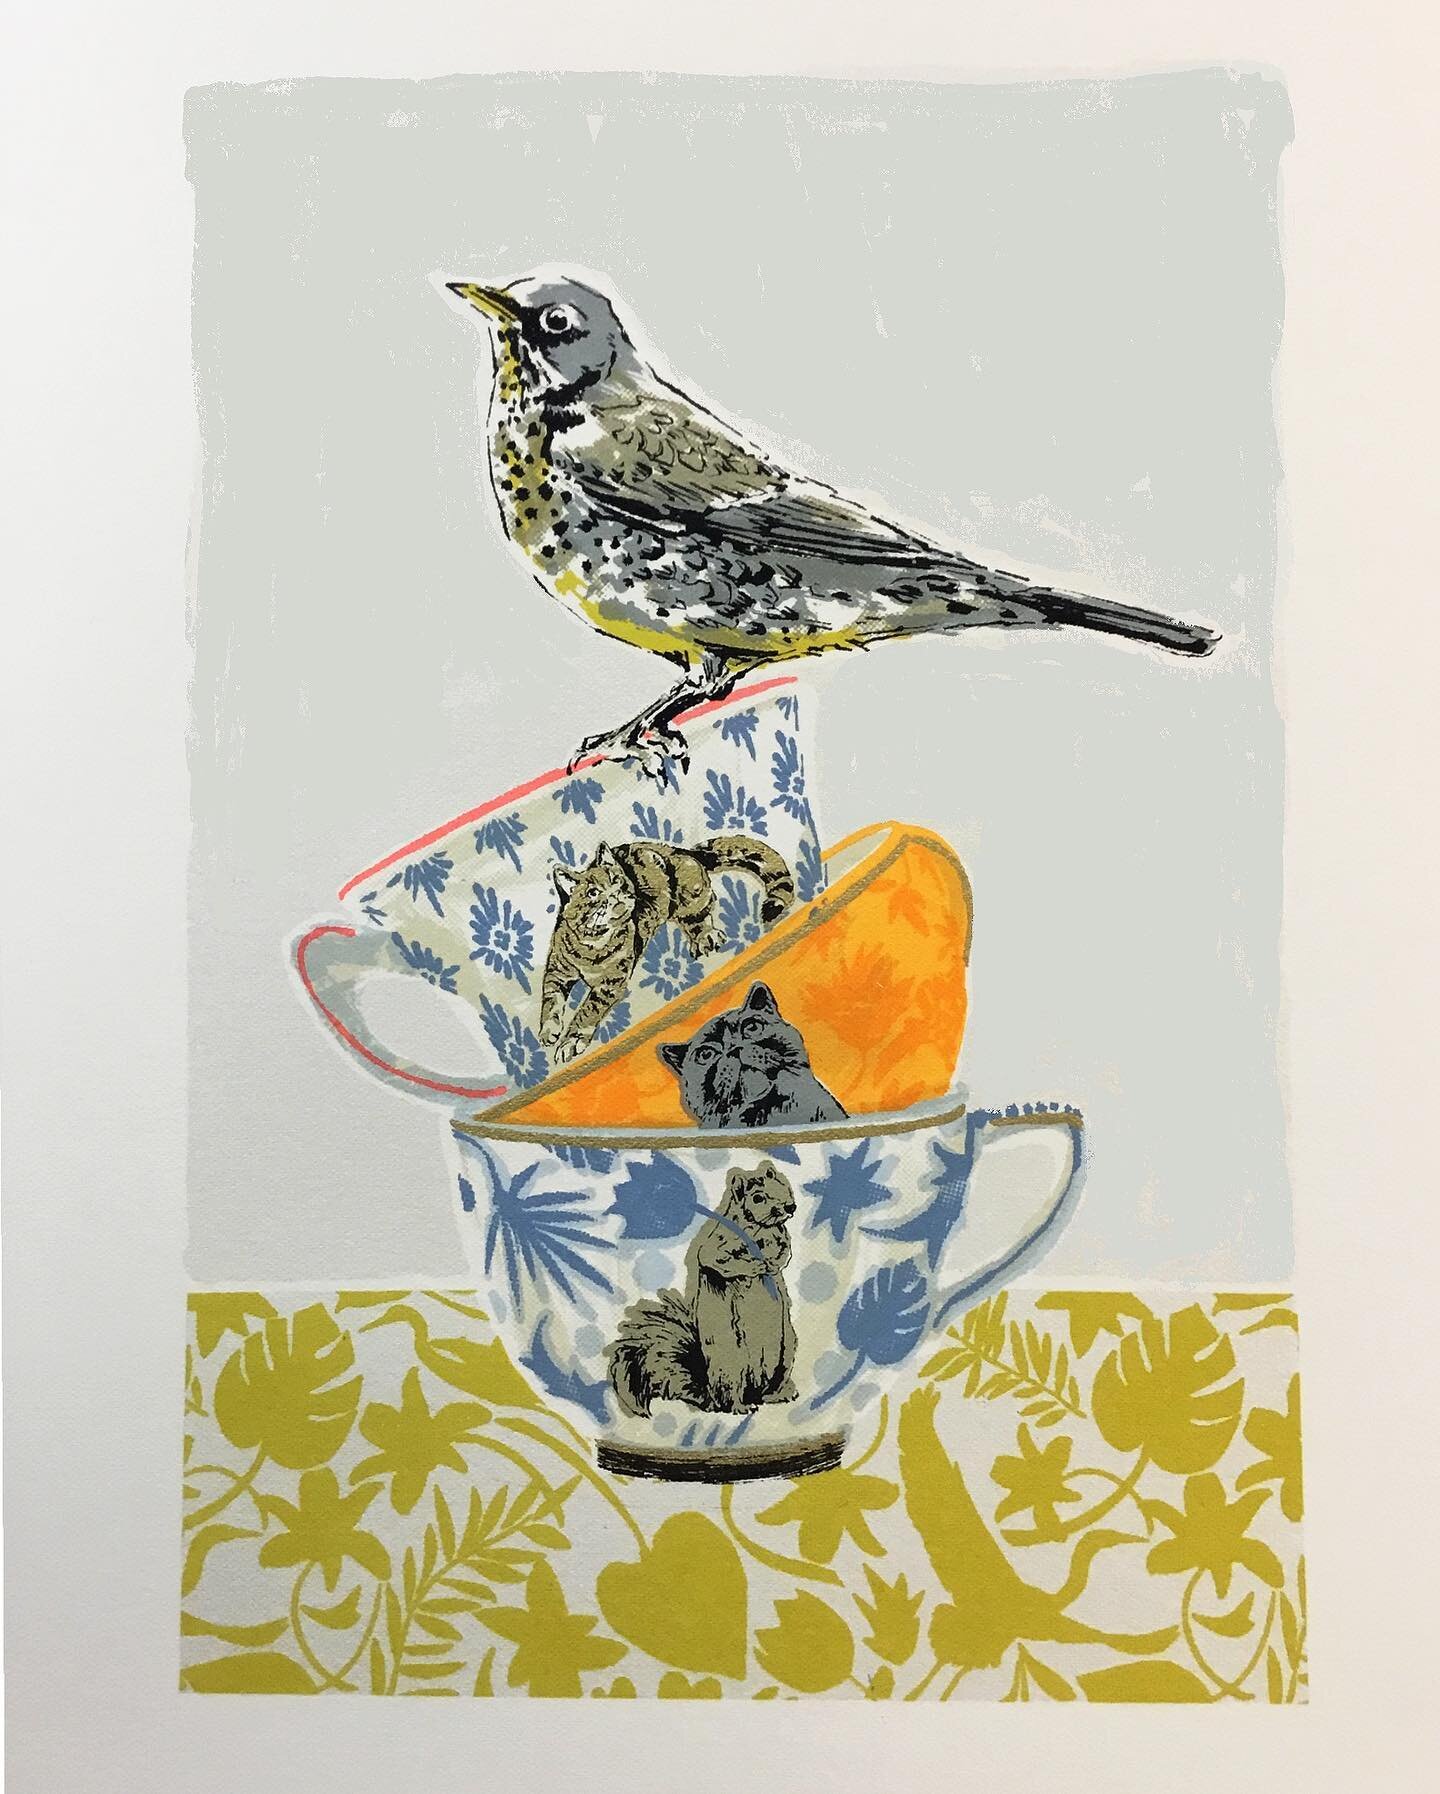 &lsquo;Look out&rsquo; printed this week and just put on my website. Managed to squeeze a squirrel into this one, a gold cat and some very pale silver ink. Hope you a good weekend.  #newprint #screenprint #screenprinted #limitededitionprint #handprin